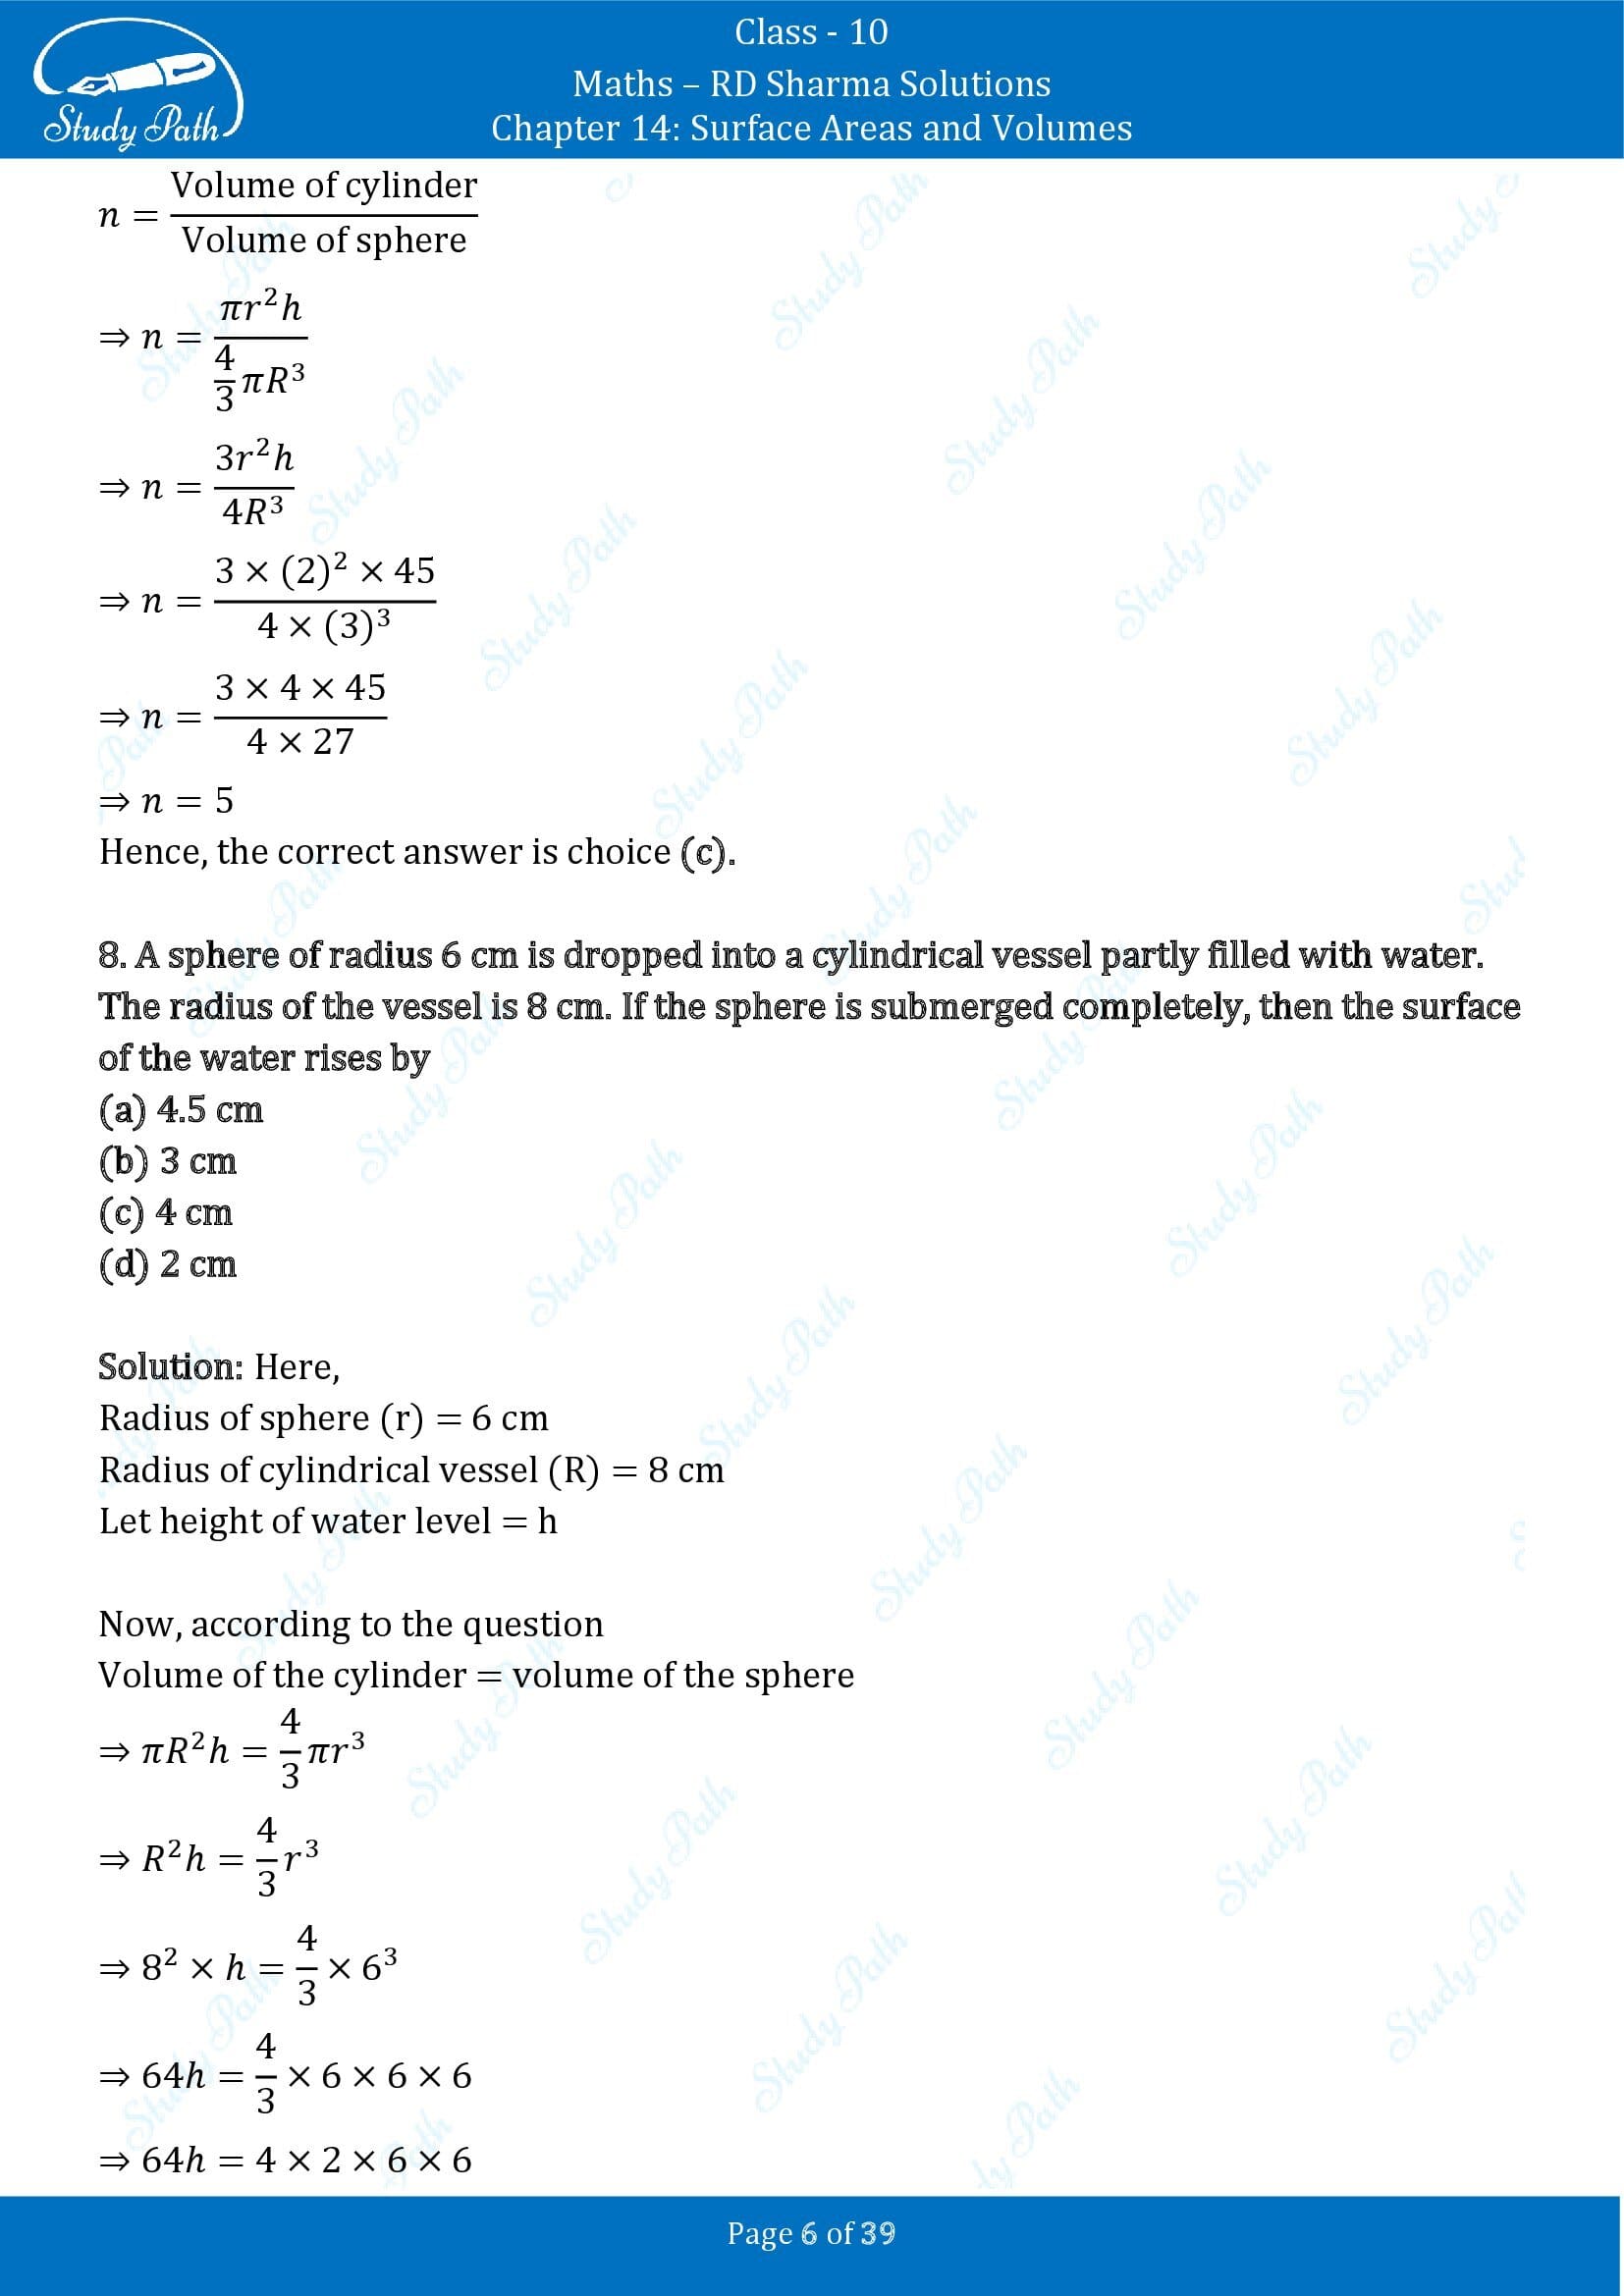 RD Sharma Solutions Class 10 Chapter 14 Surface Areas and Volumes Multiple Choice Question MCQs 00006